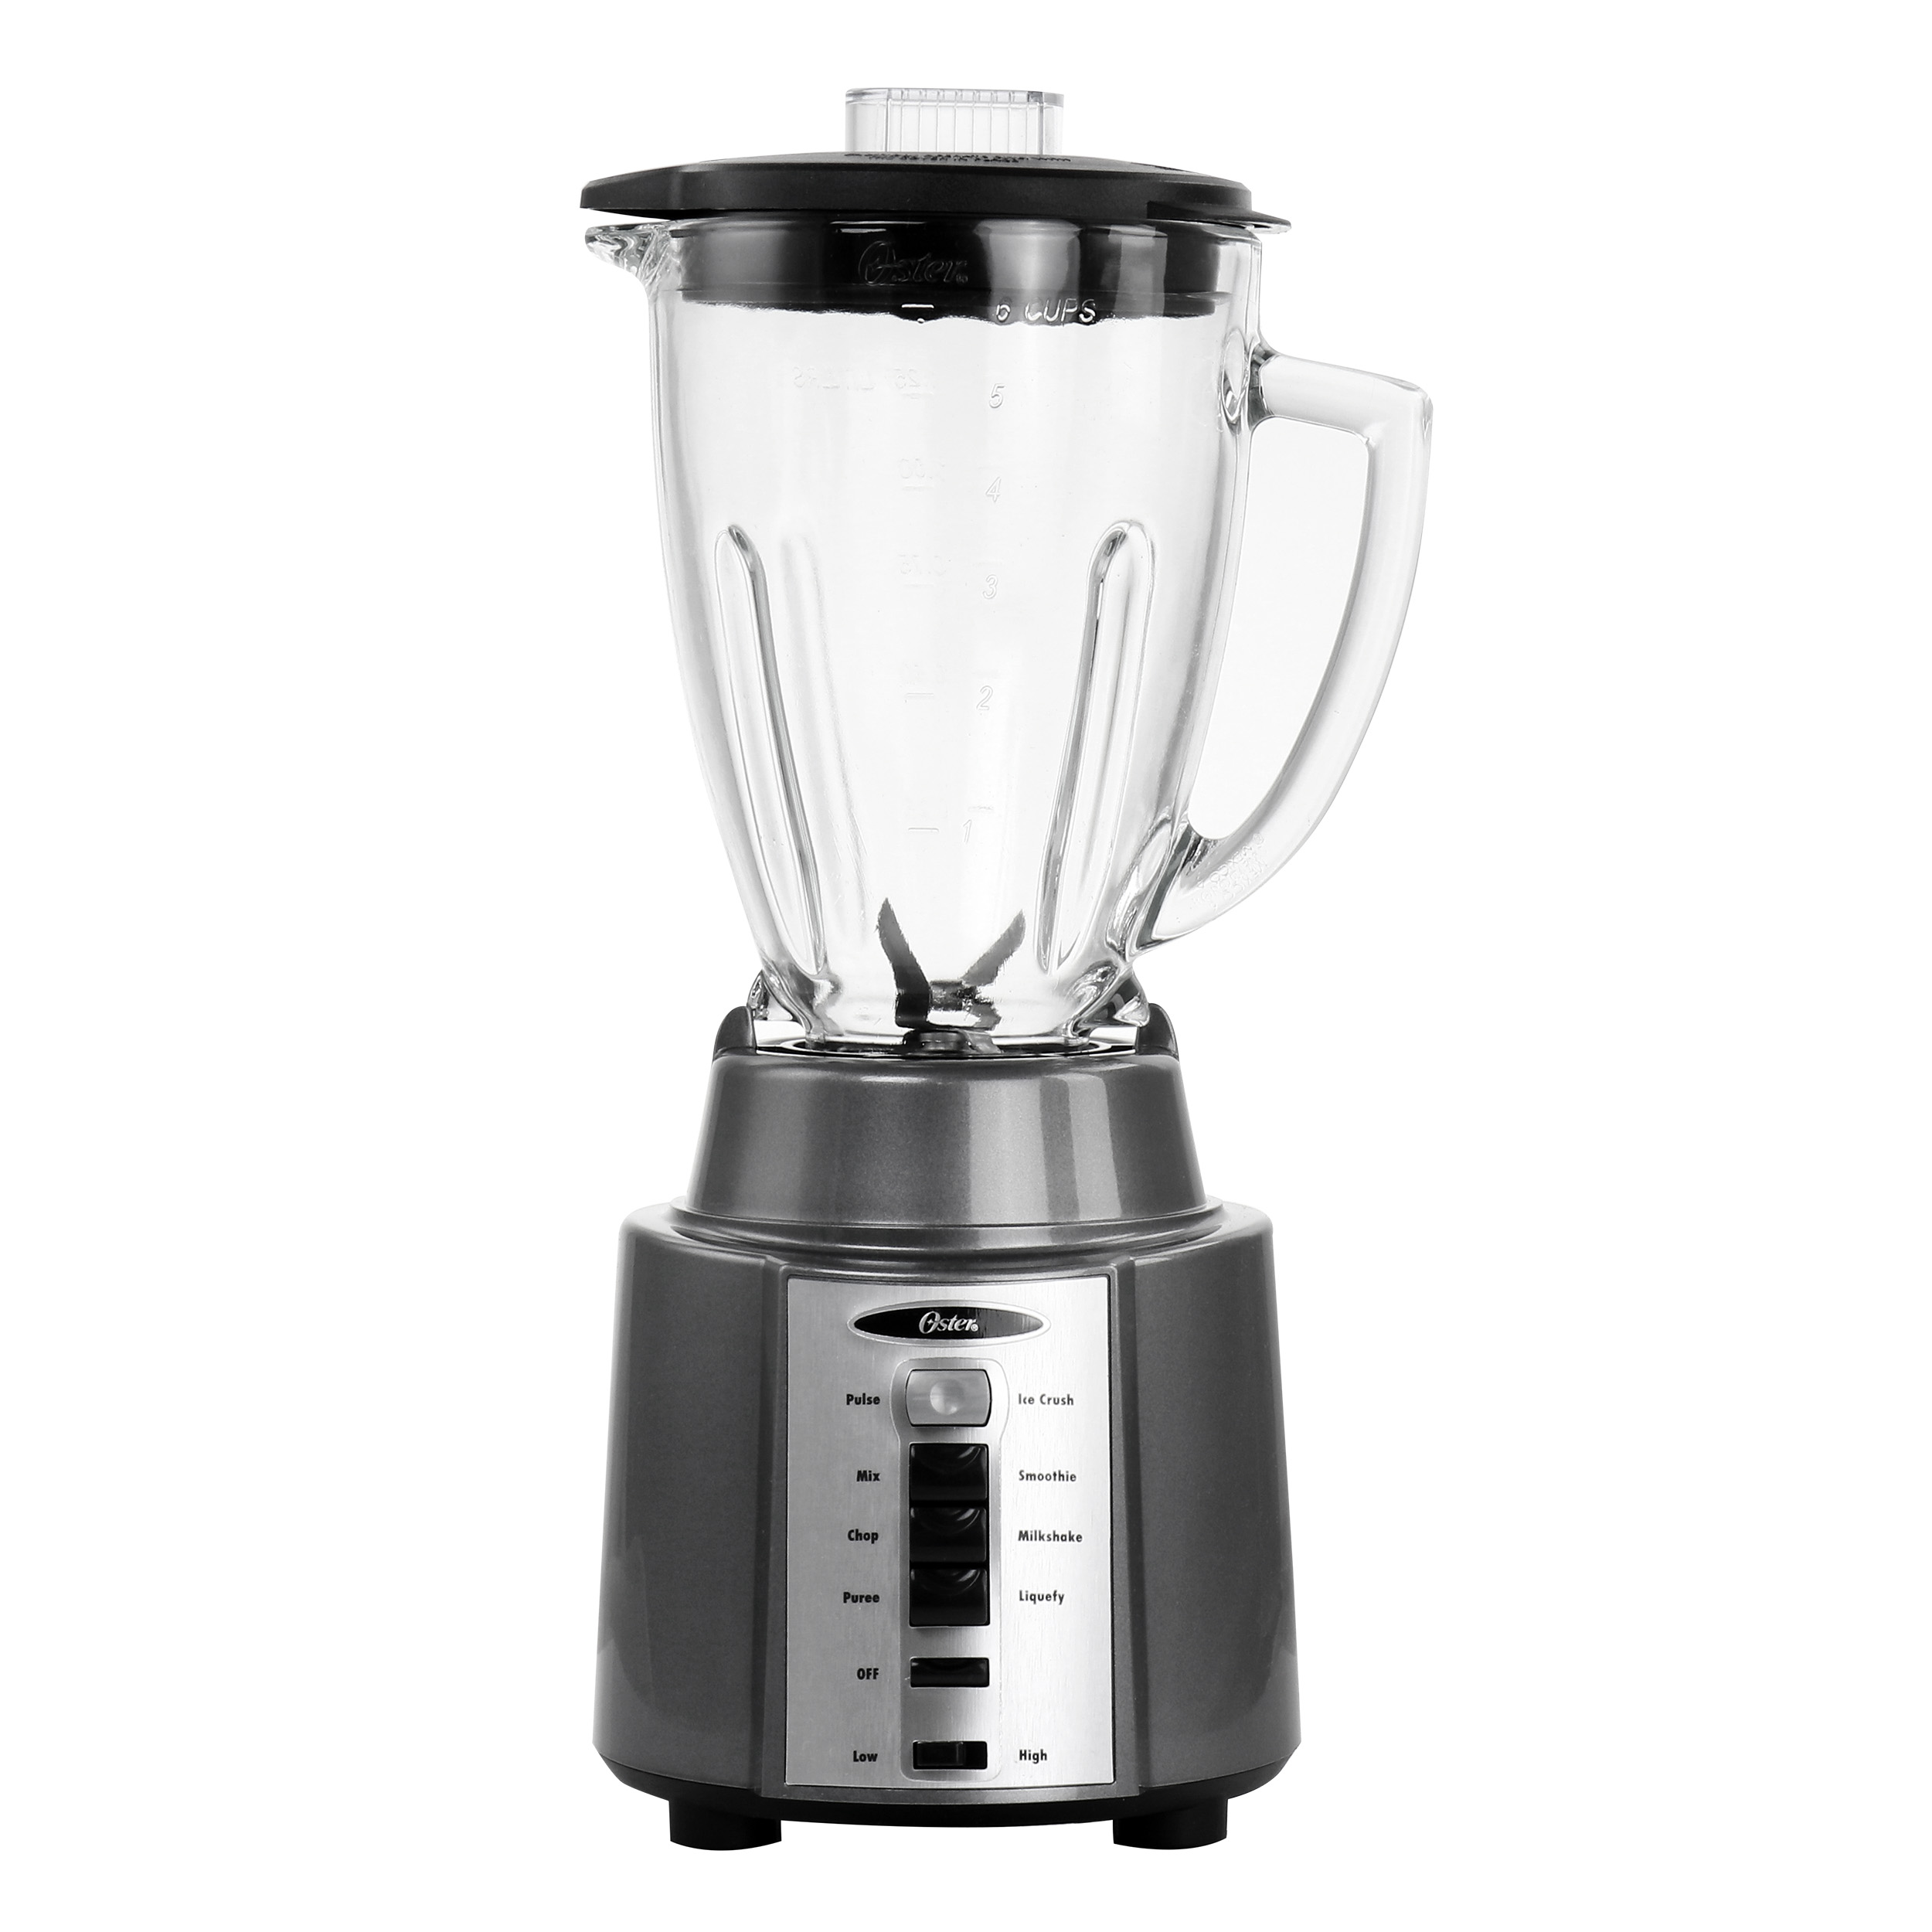 Oster 6 Cup 8 Speed Blender with Glass Jar in Gray - image 1 of 3